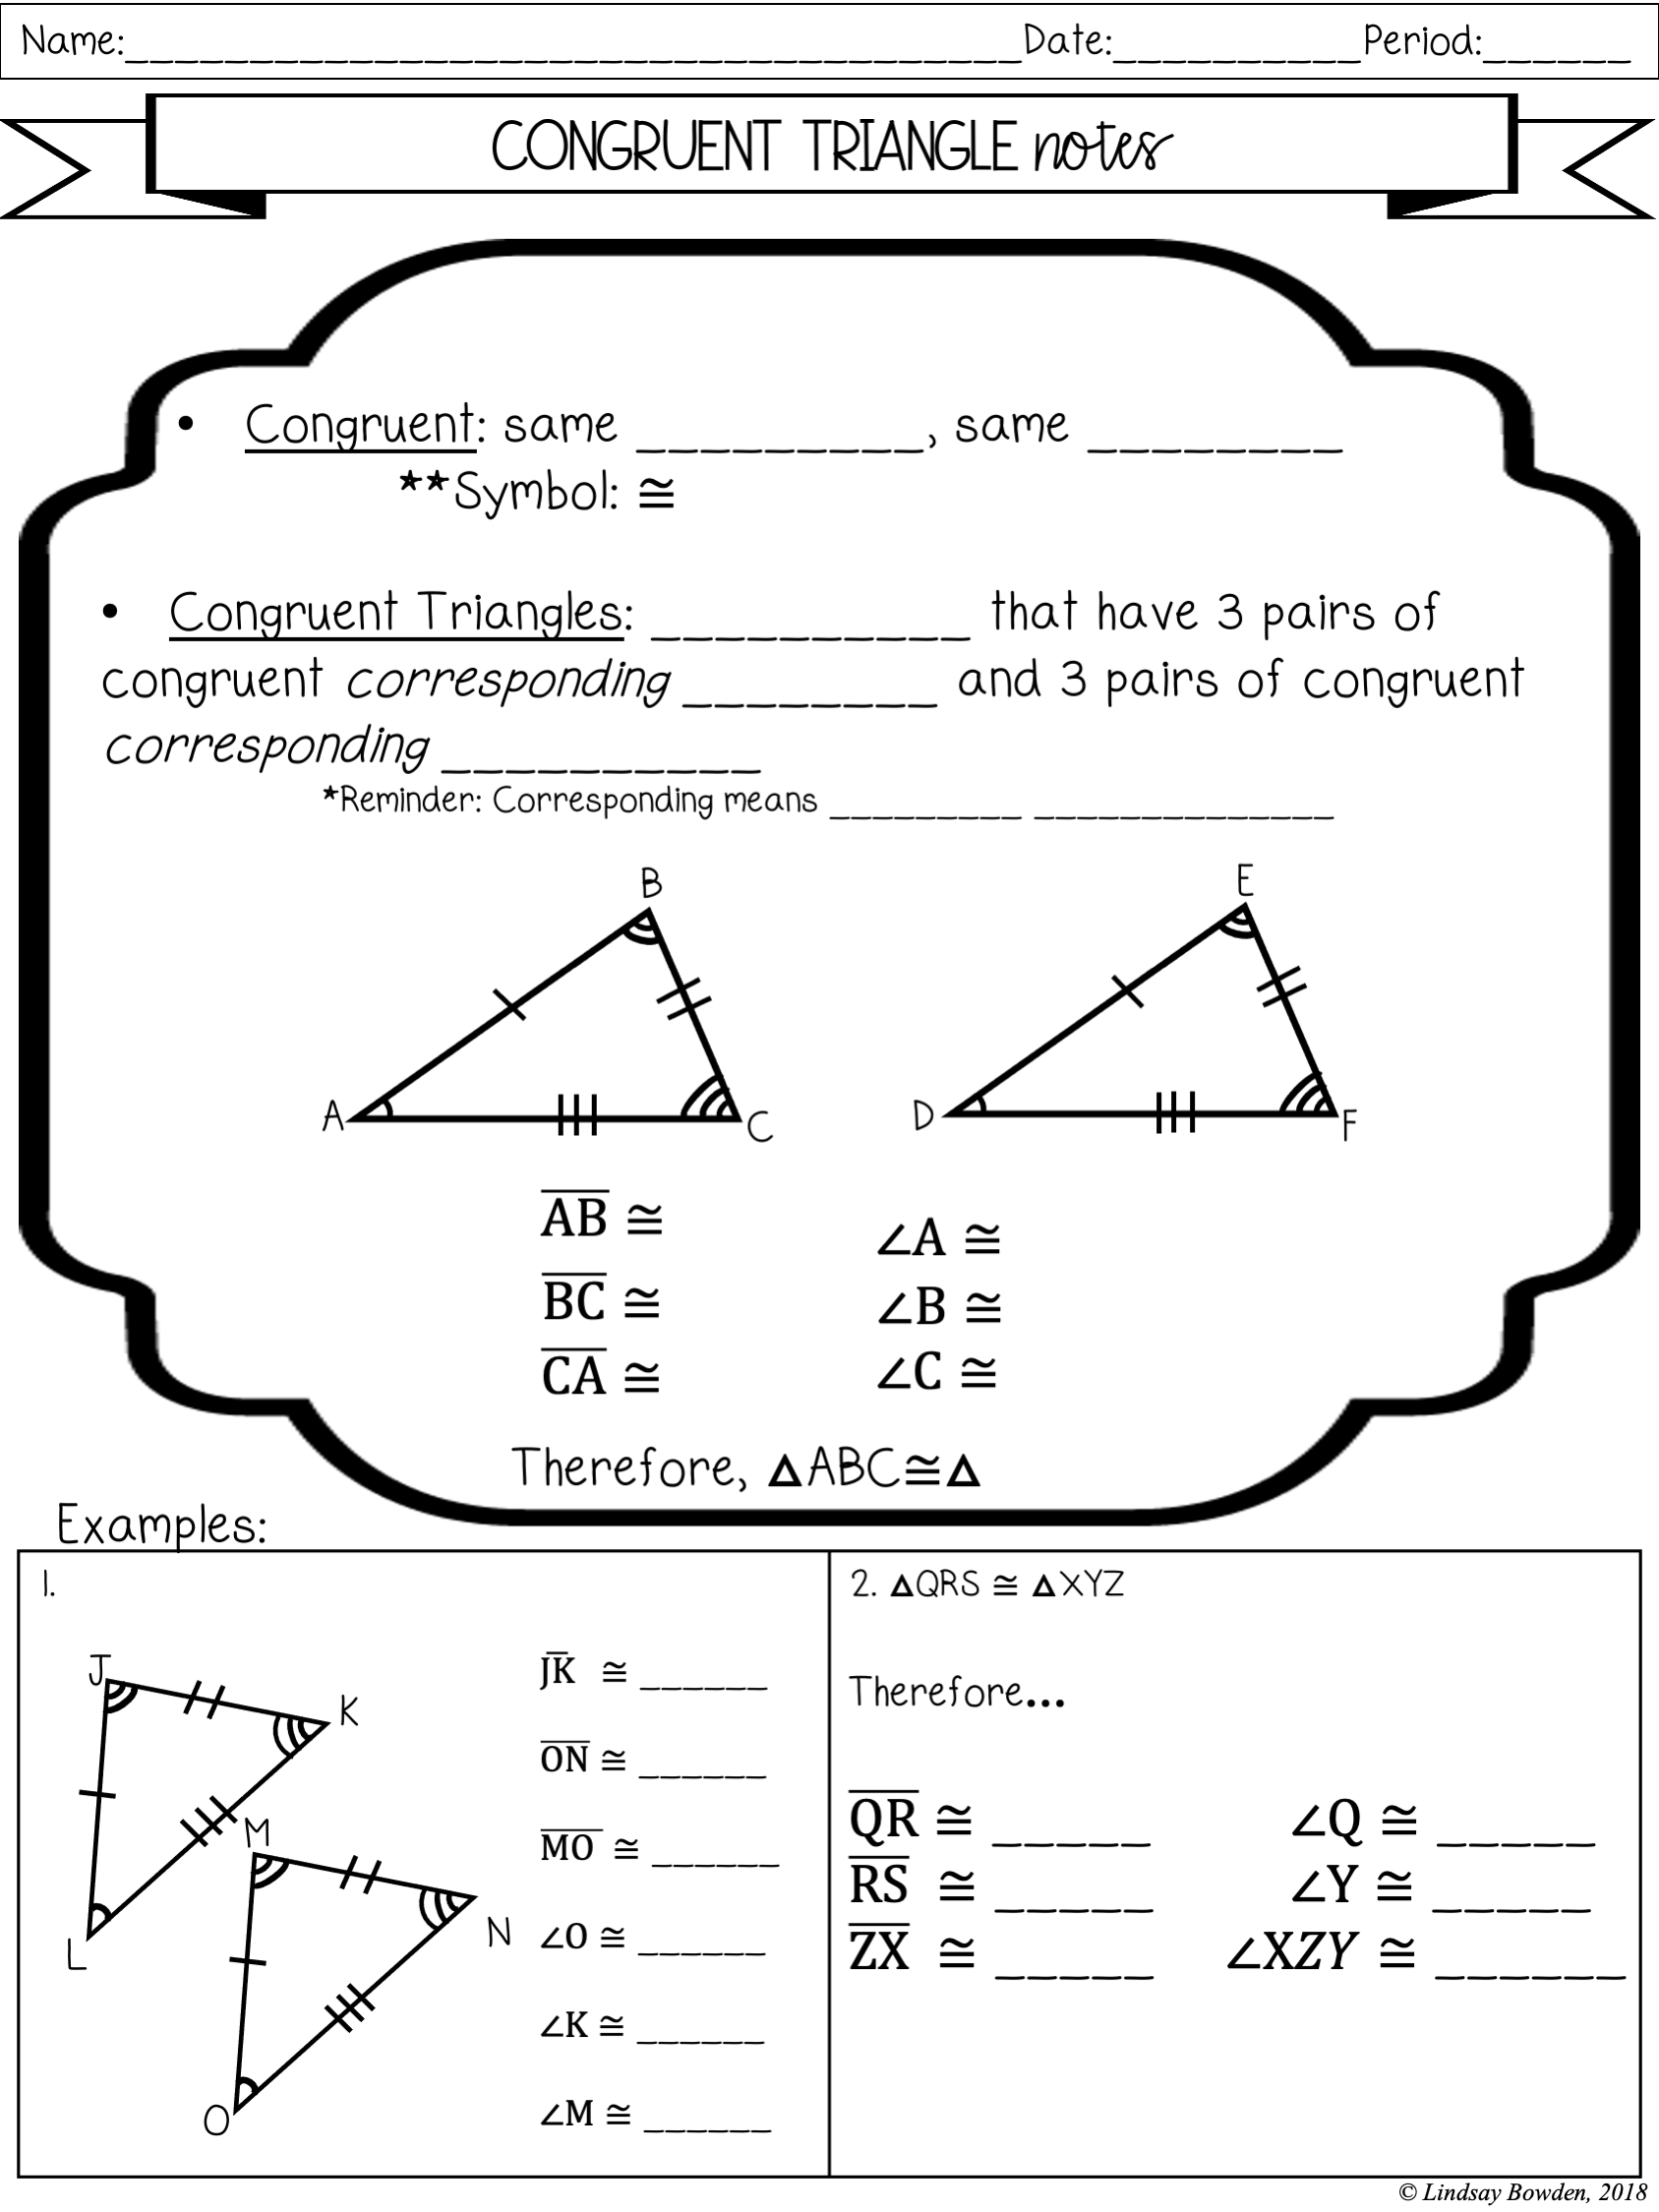 Congruent Triangles Notes and Worksheets - Lindsay Bowden Intended For Geometry Worksheet Congruent Triangles Answers